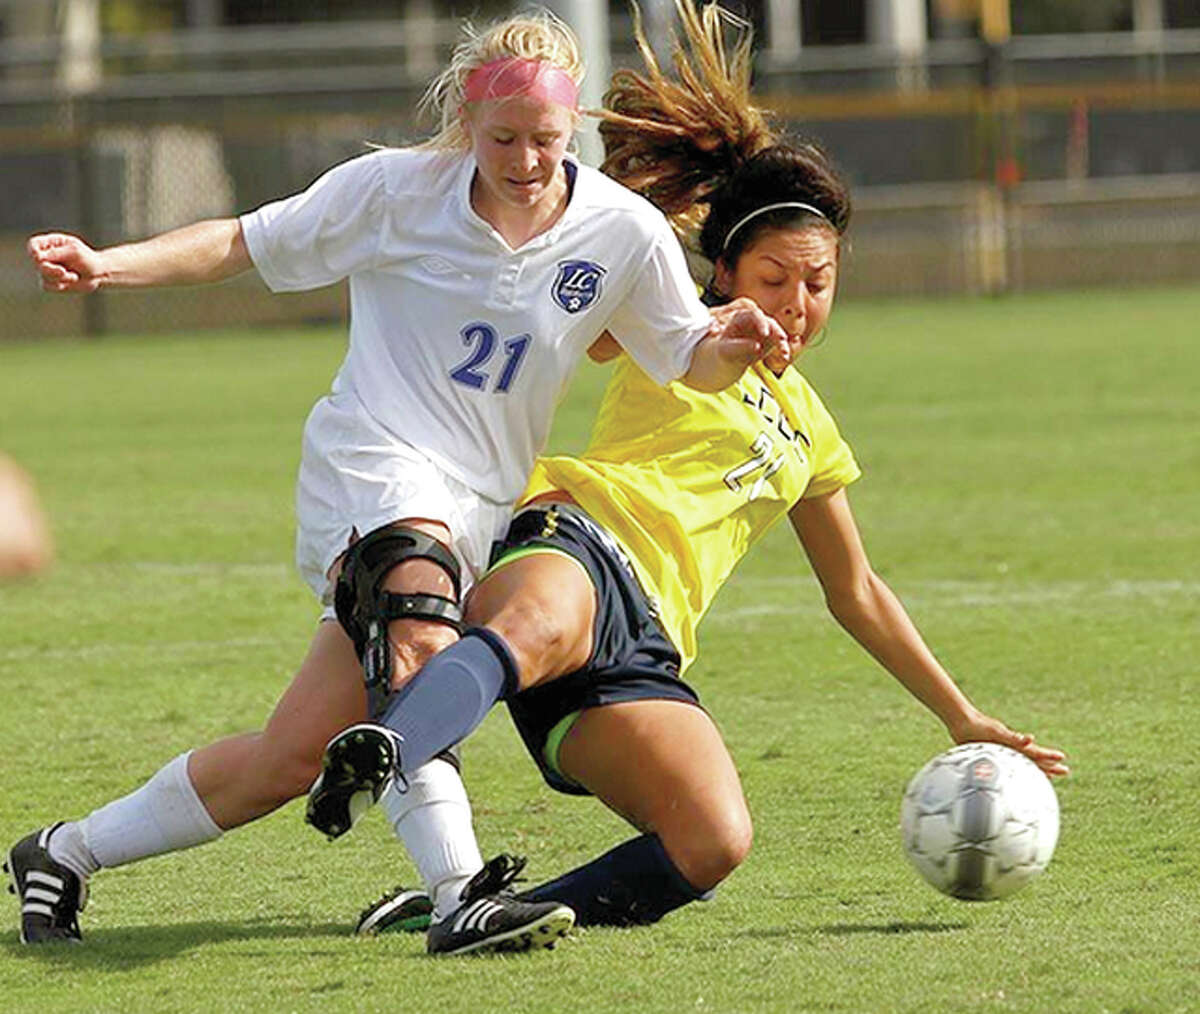 Lewis and Clark’s Cassidy Foley, left, collides with Melissa Mondragon of Laramie County Community College in Tuesday’s game in the NJCAA DIvision I National women’s Soccer Tournament in Melbourne, Florida. Laramie won 3-1.